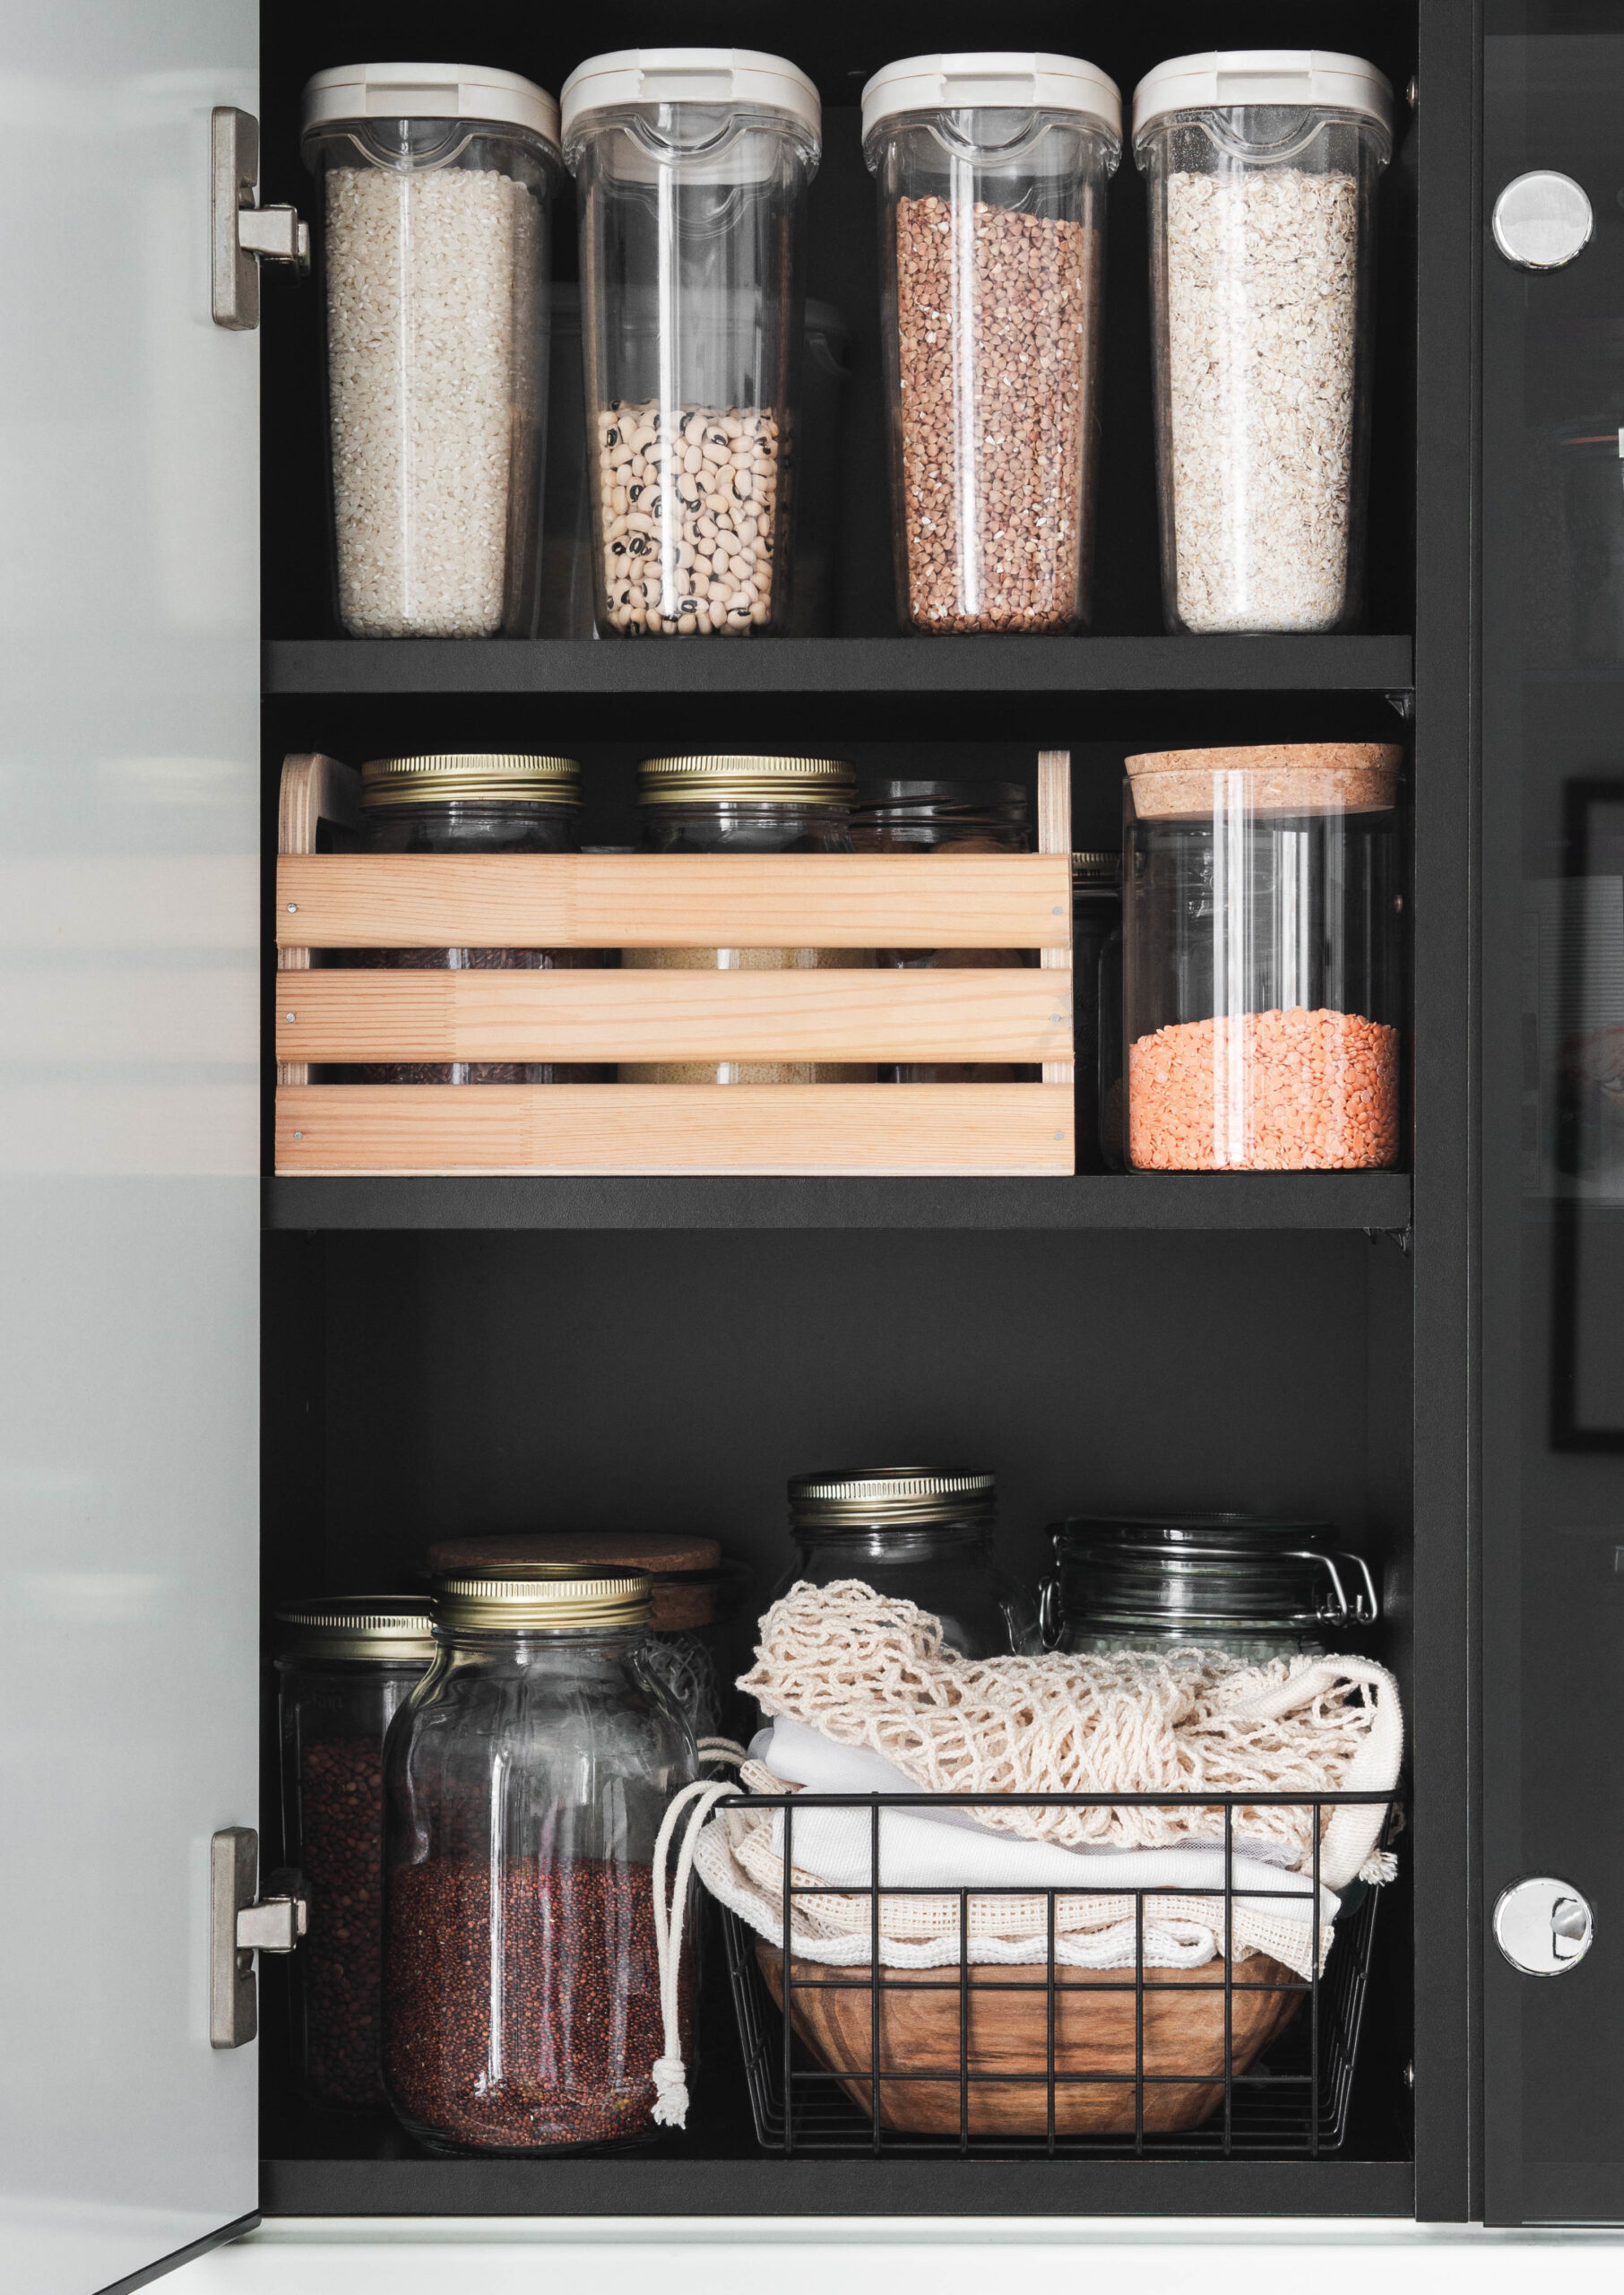 8 Insanely Good Apartment Pantry Storage Ideas That’ll Finally Organize Your Pantry!